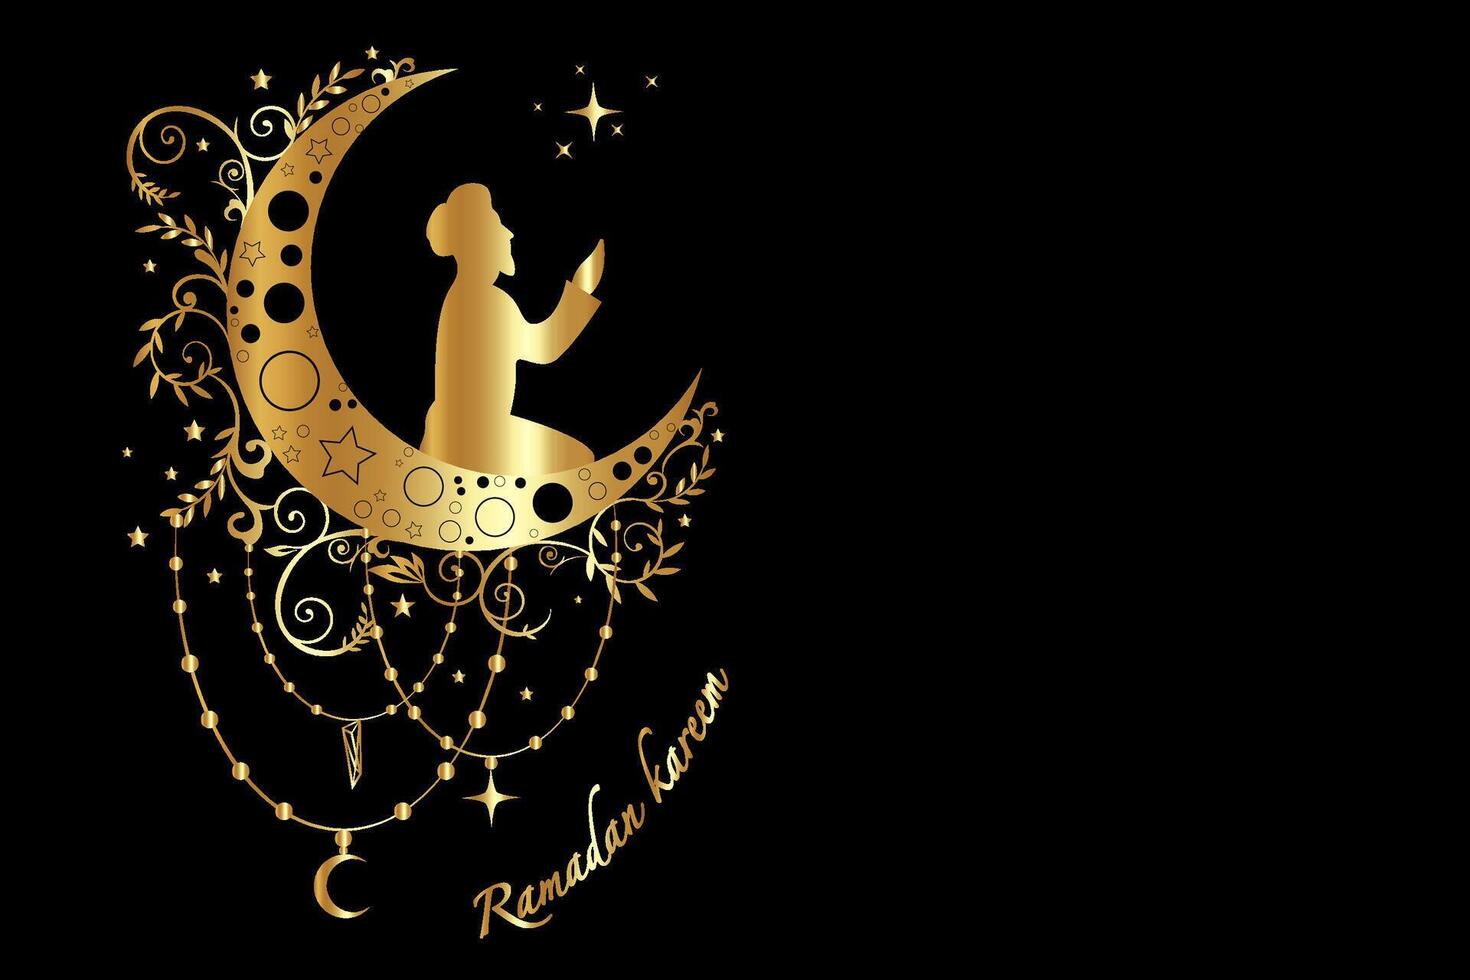 Gold Silhouette of a Muslim praying on Cescent moon, Ramadan concept in boho style. Luxury Islamic symbol can be used for the month of Ramadan for logo, website and poster designs. vector